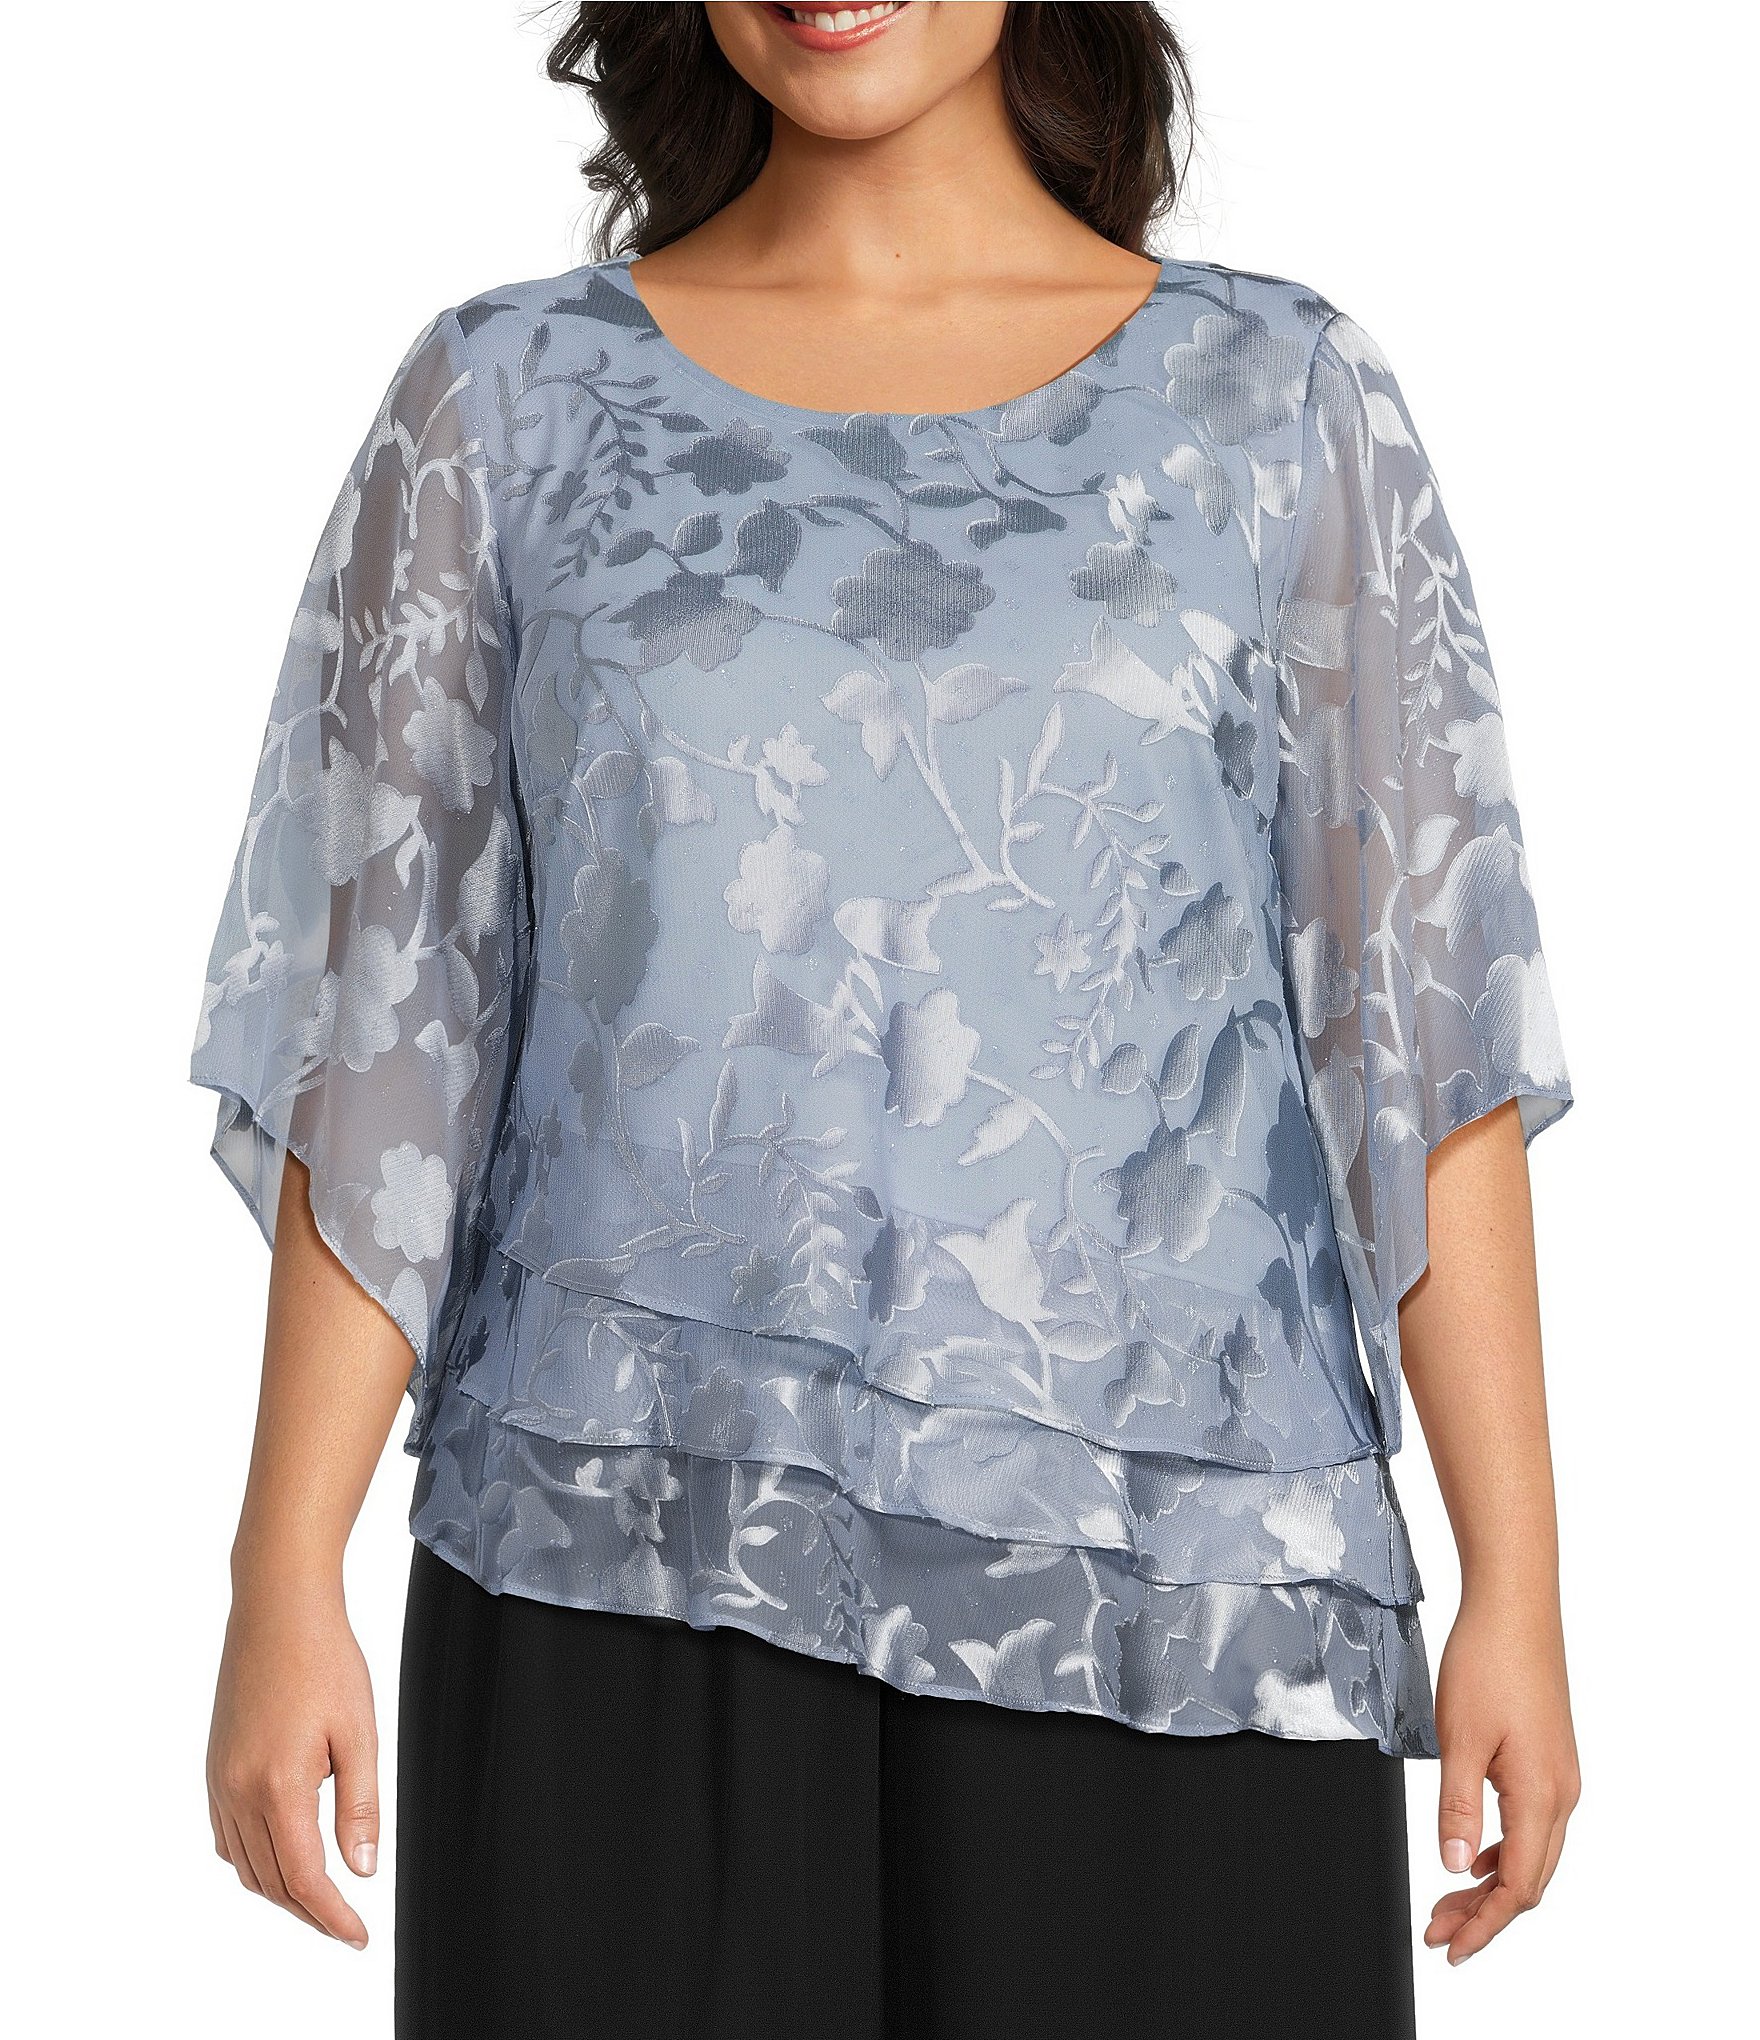 Gamiss Womens Butterfly Print Chiffon Blouse Plus Size, Casual